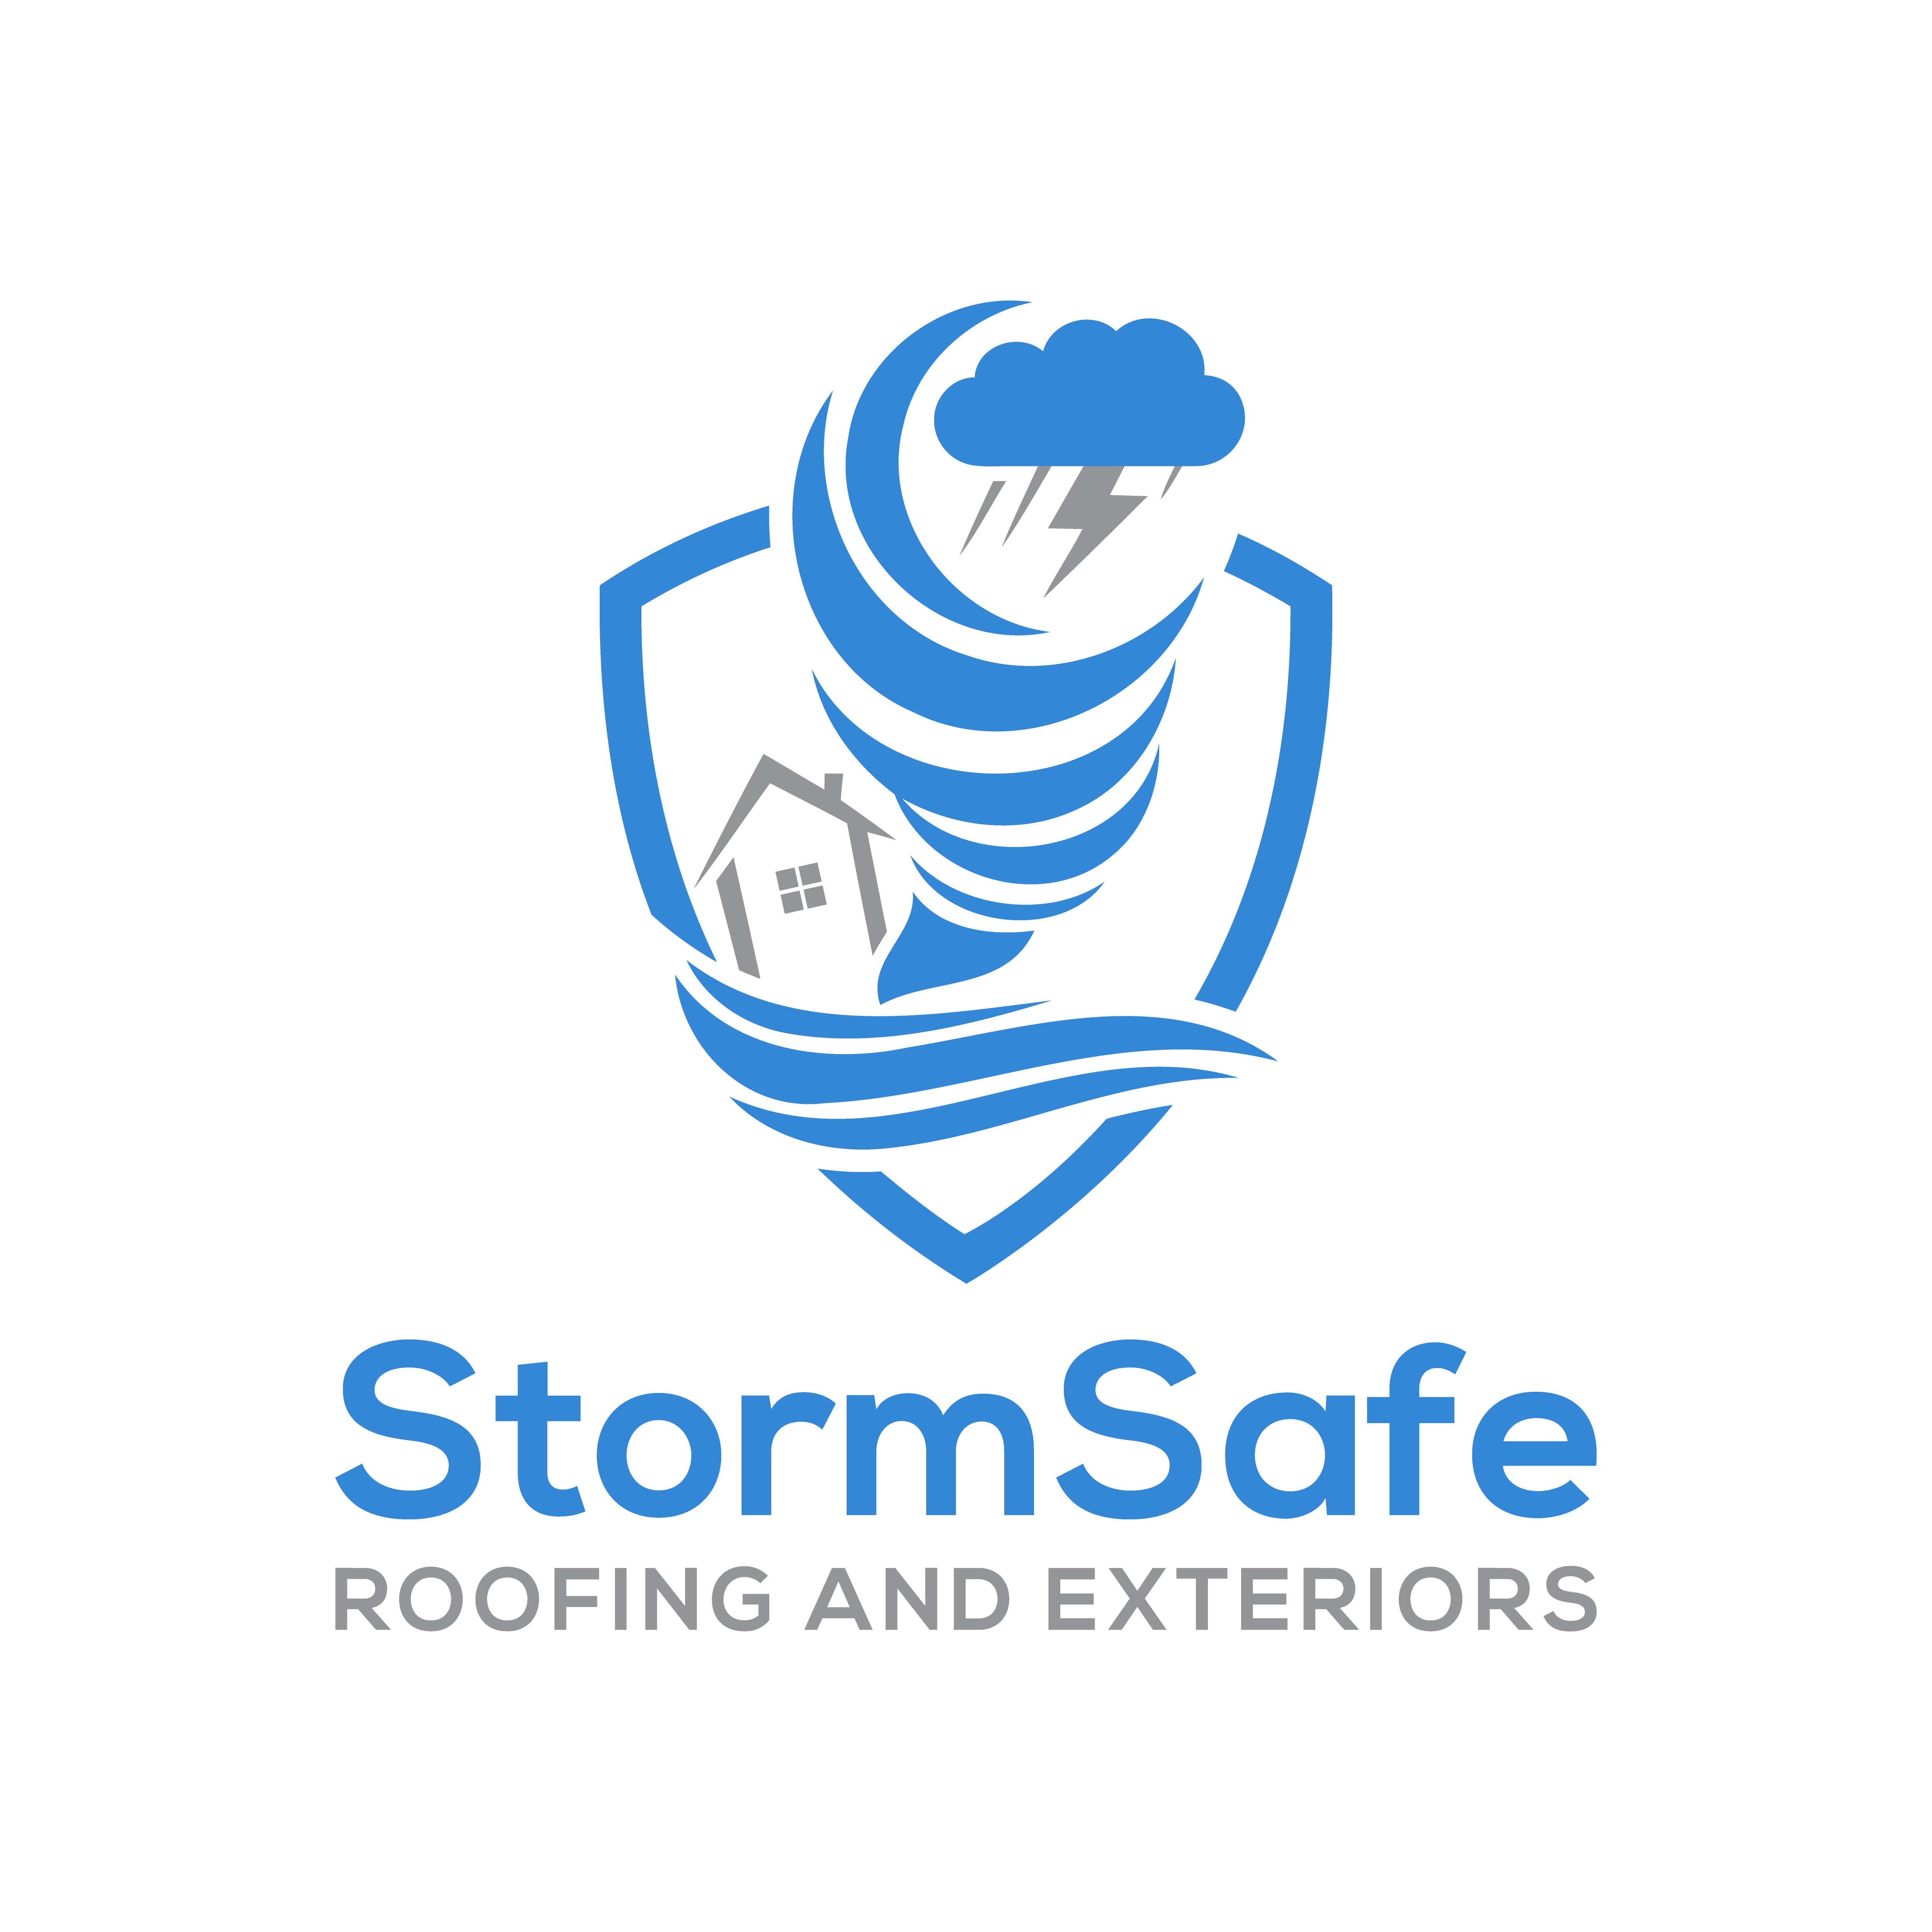 StormSafe Roofing and Exteriors